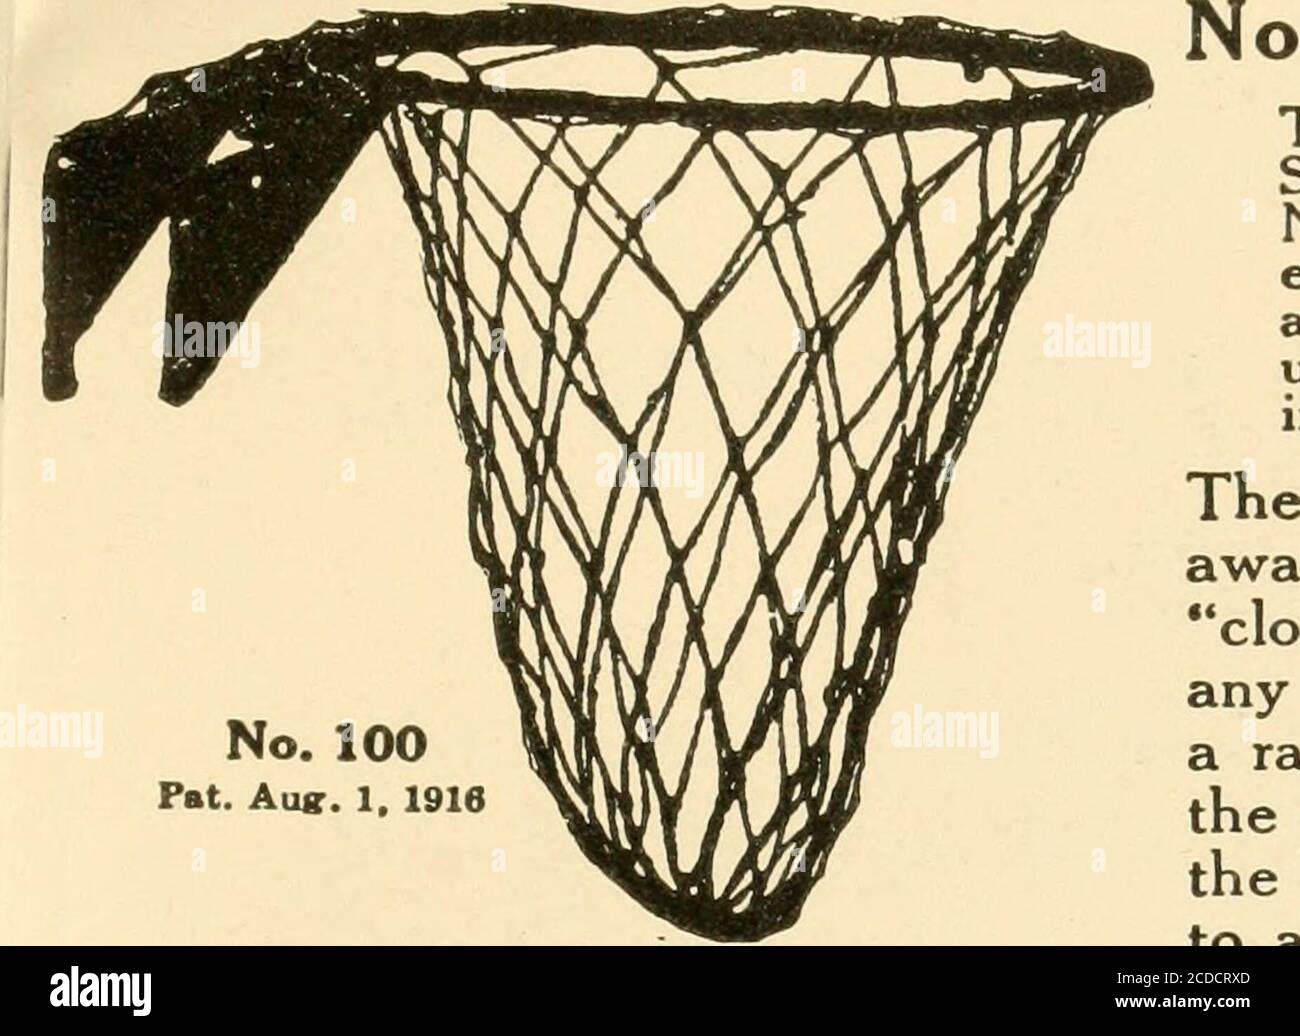 Exercises the horse . SPALDING BASKET BALL SUNDRIES. 100 Basket Ball Goals The Spalding No. 100 goal—made under theSchommer patent, dated Aug. 1, 1916,No. 1,193,024—is outcome of